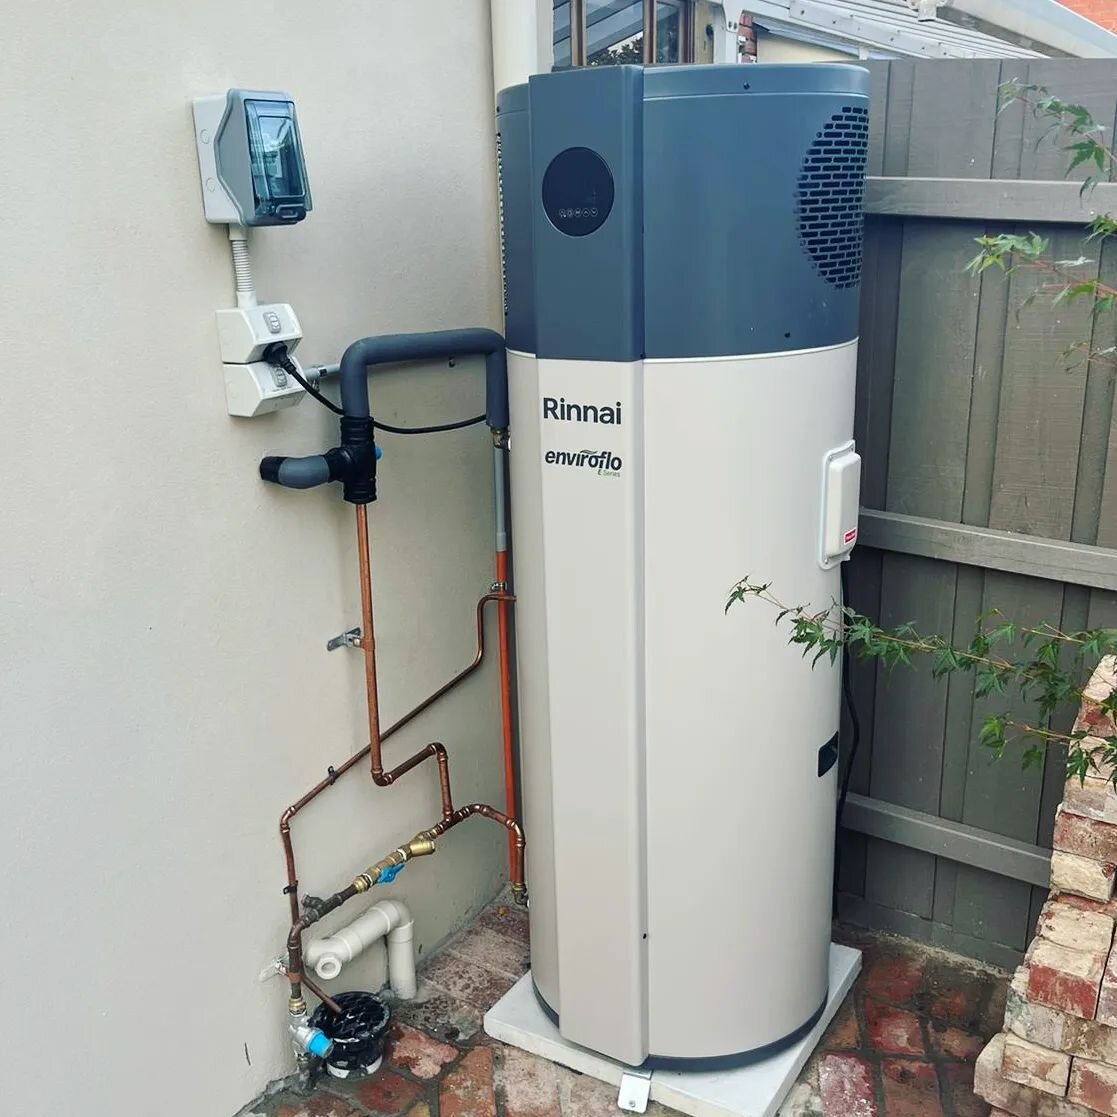 Replace your old hot water unit with a new energy efficent heat pump before winter sets in! 🥶  Contact us for more information

#hotwater #energyefficiency #plumbing #plumbingmelbourne